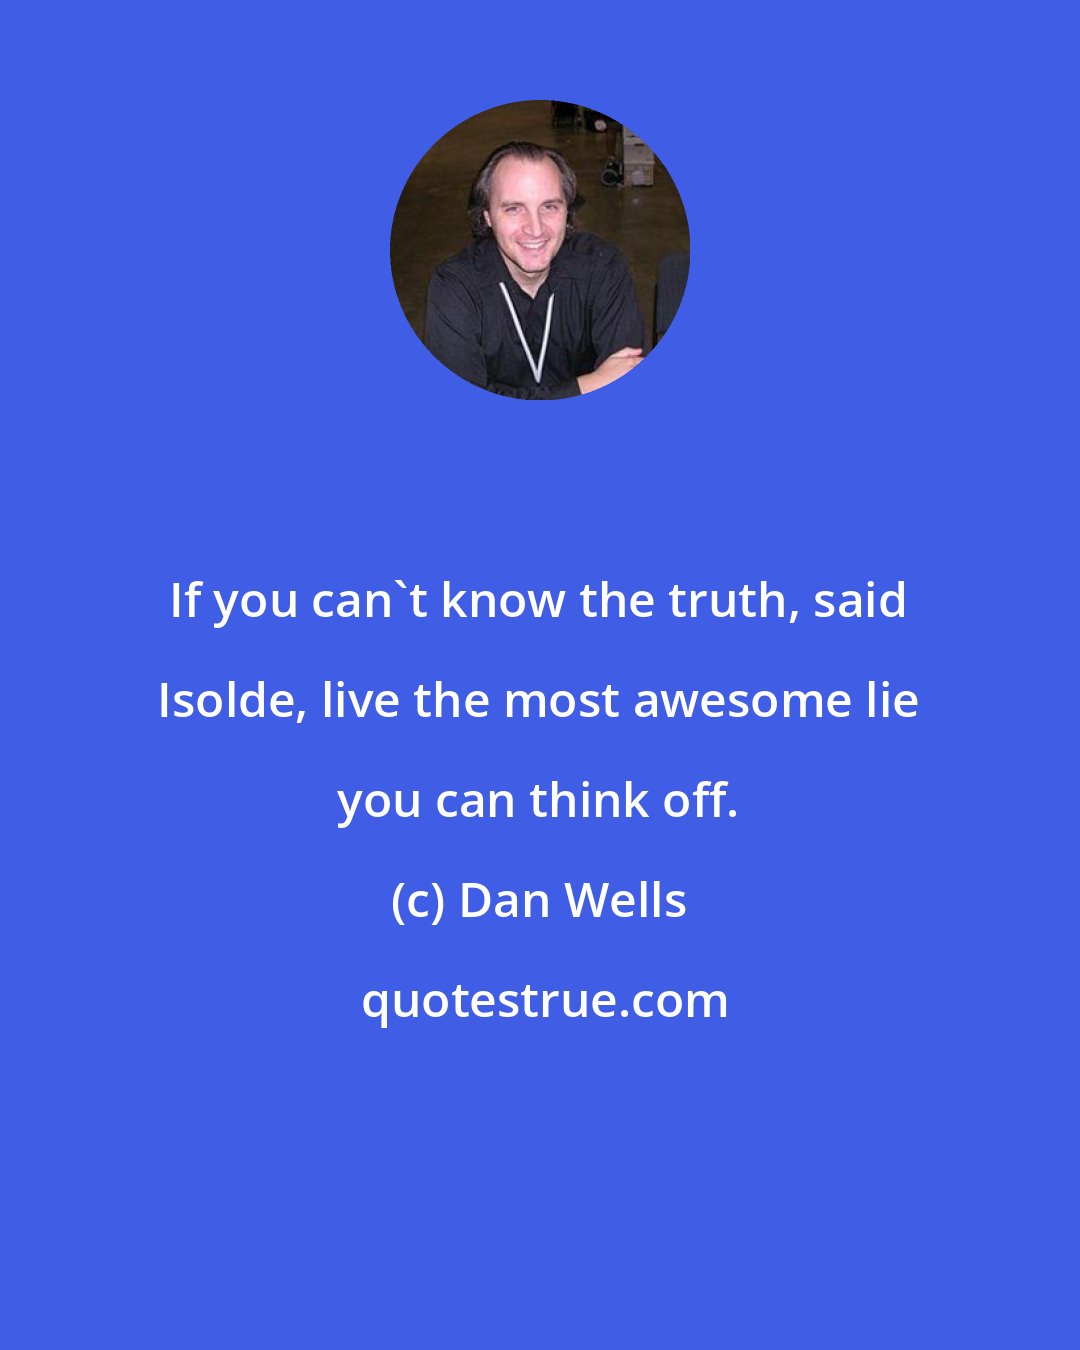 Dan Wells: If you can't know the truth, said Isolde, live the most awesome lie you can think off.